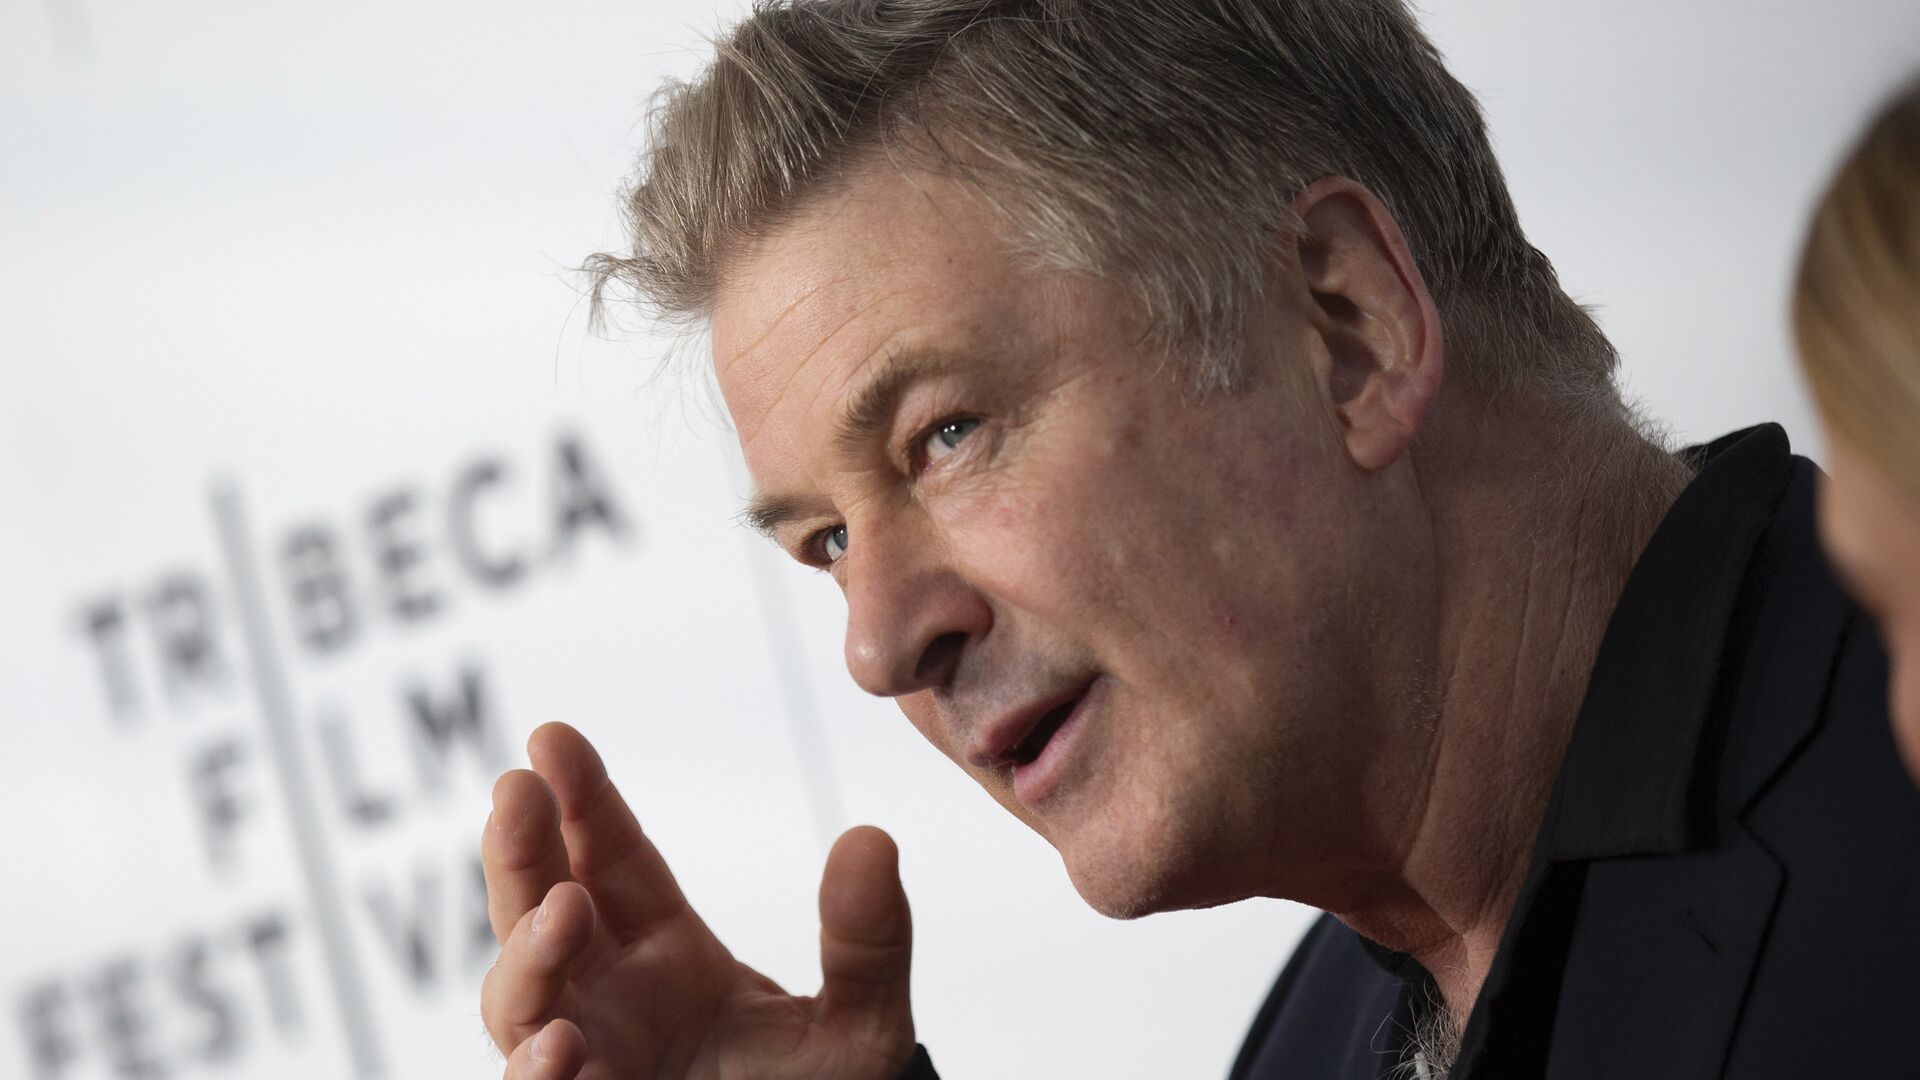 Actor Alec Baldwin attends the screening for Framing John DeLorean during the 2019 Tribeca Film Festival at the SVA Theatre on Tuesday, April 30, 2019, in New York.  - Sputnik International, 1920, 03.12.2021